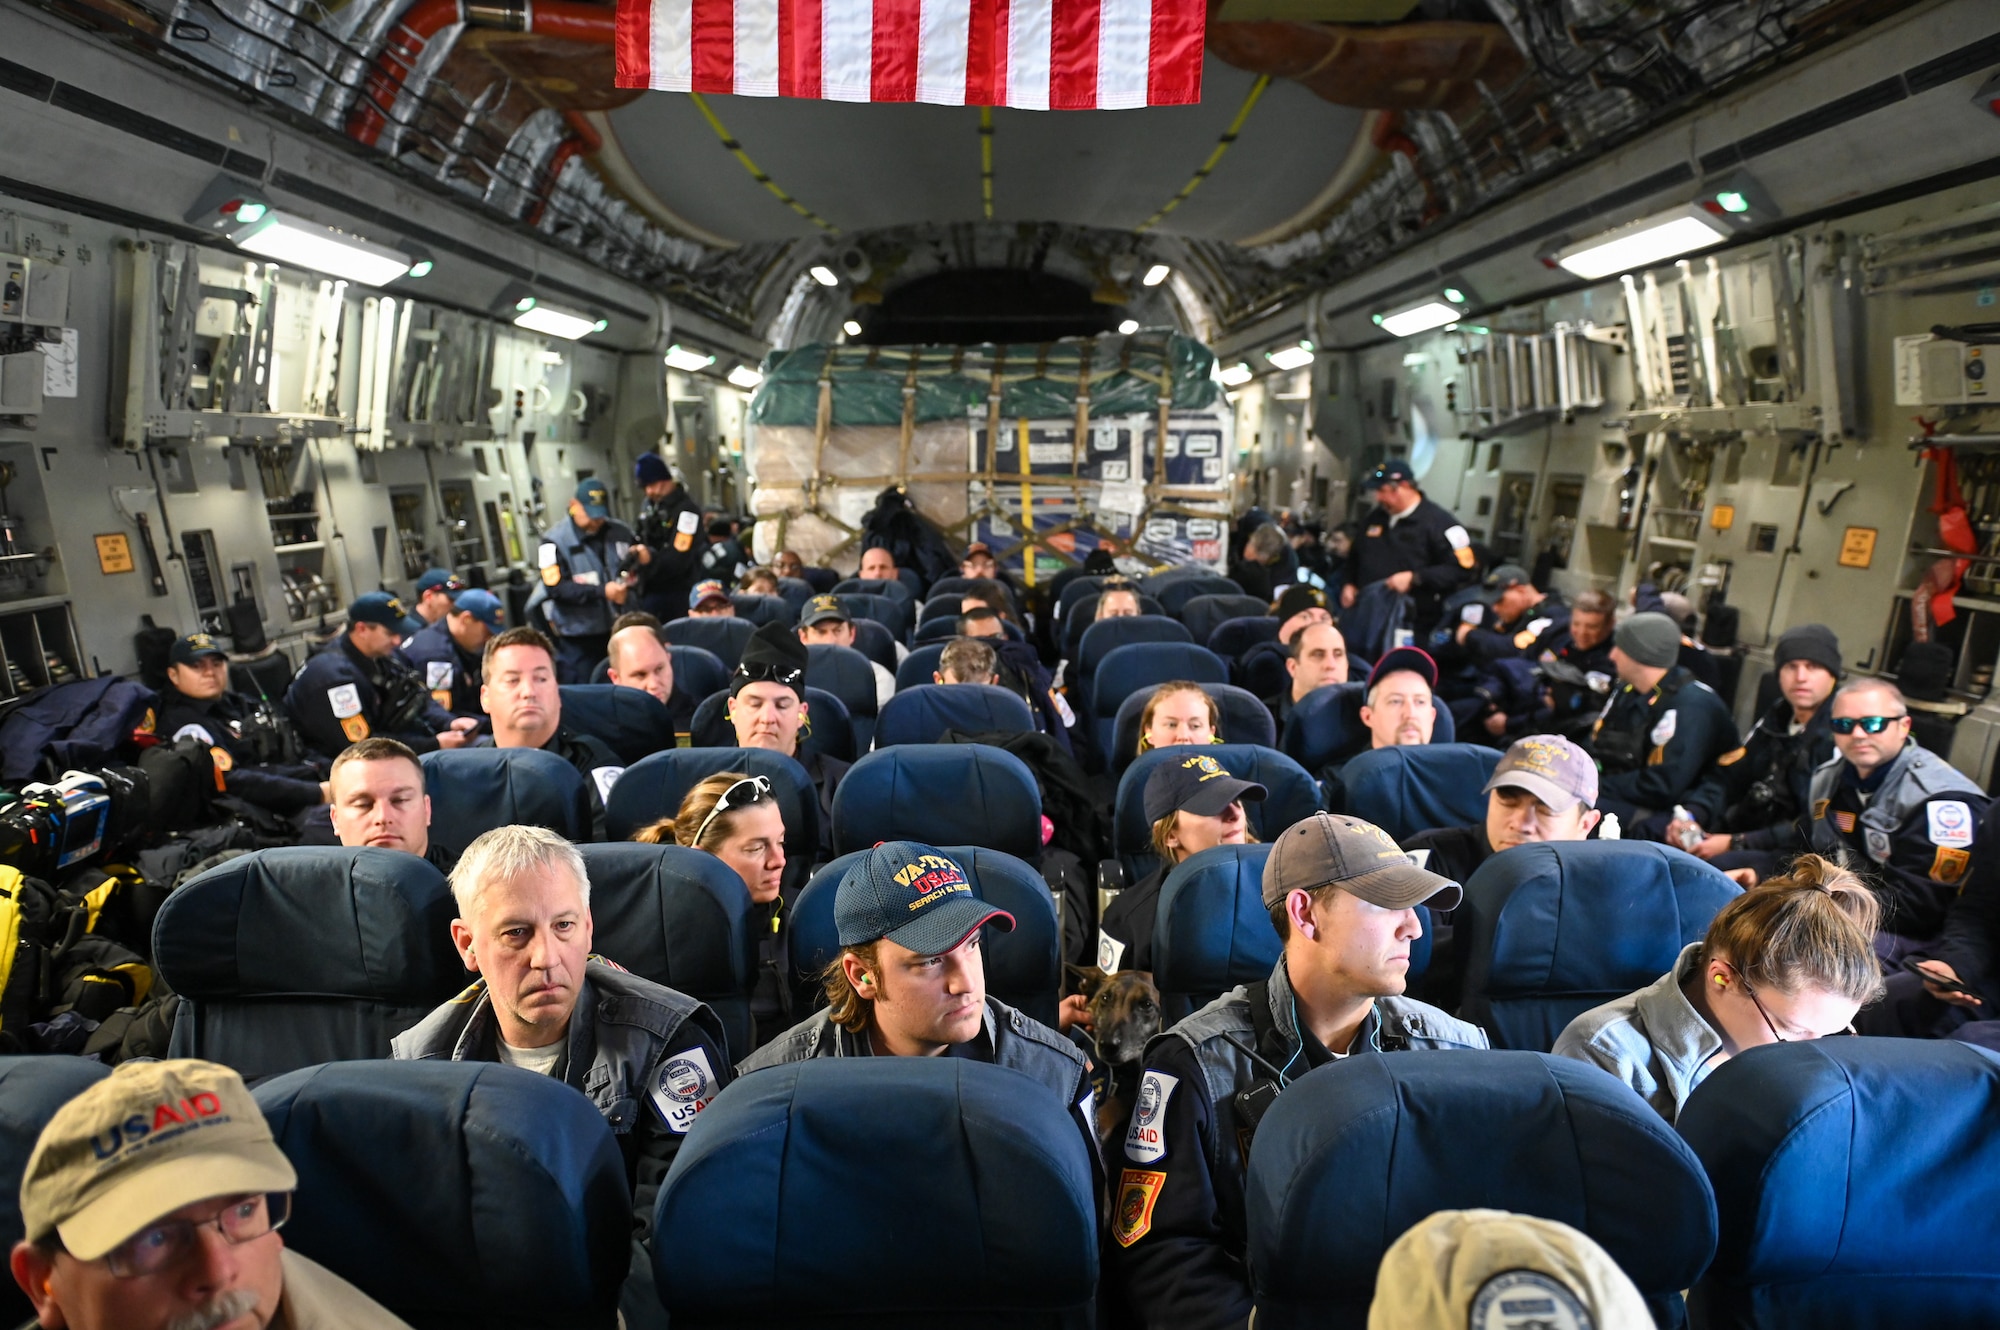 Members of the United States Agency for International Development’s Disaster Assistance Response Team wait to deplane at Incirlik Air Base, Türkiye, Feb. 8, 2023. The DART is assigned to lead the U.S. government humanitarian response following a series of earthquakes that struck central-southern Türkiye on Feb. 6, 2023.